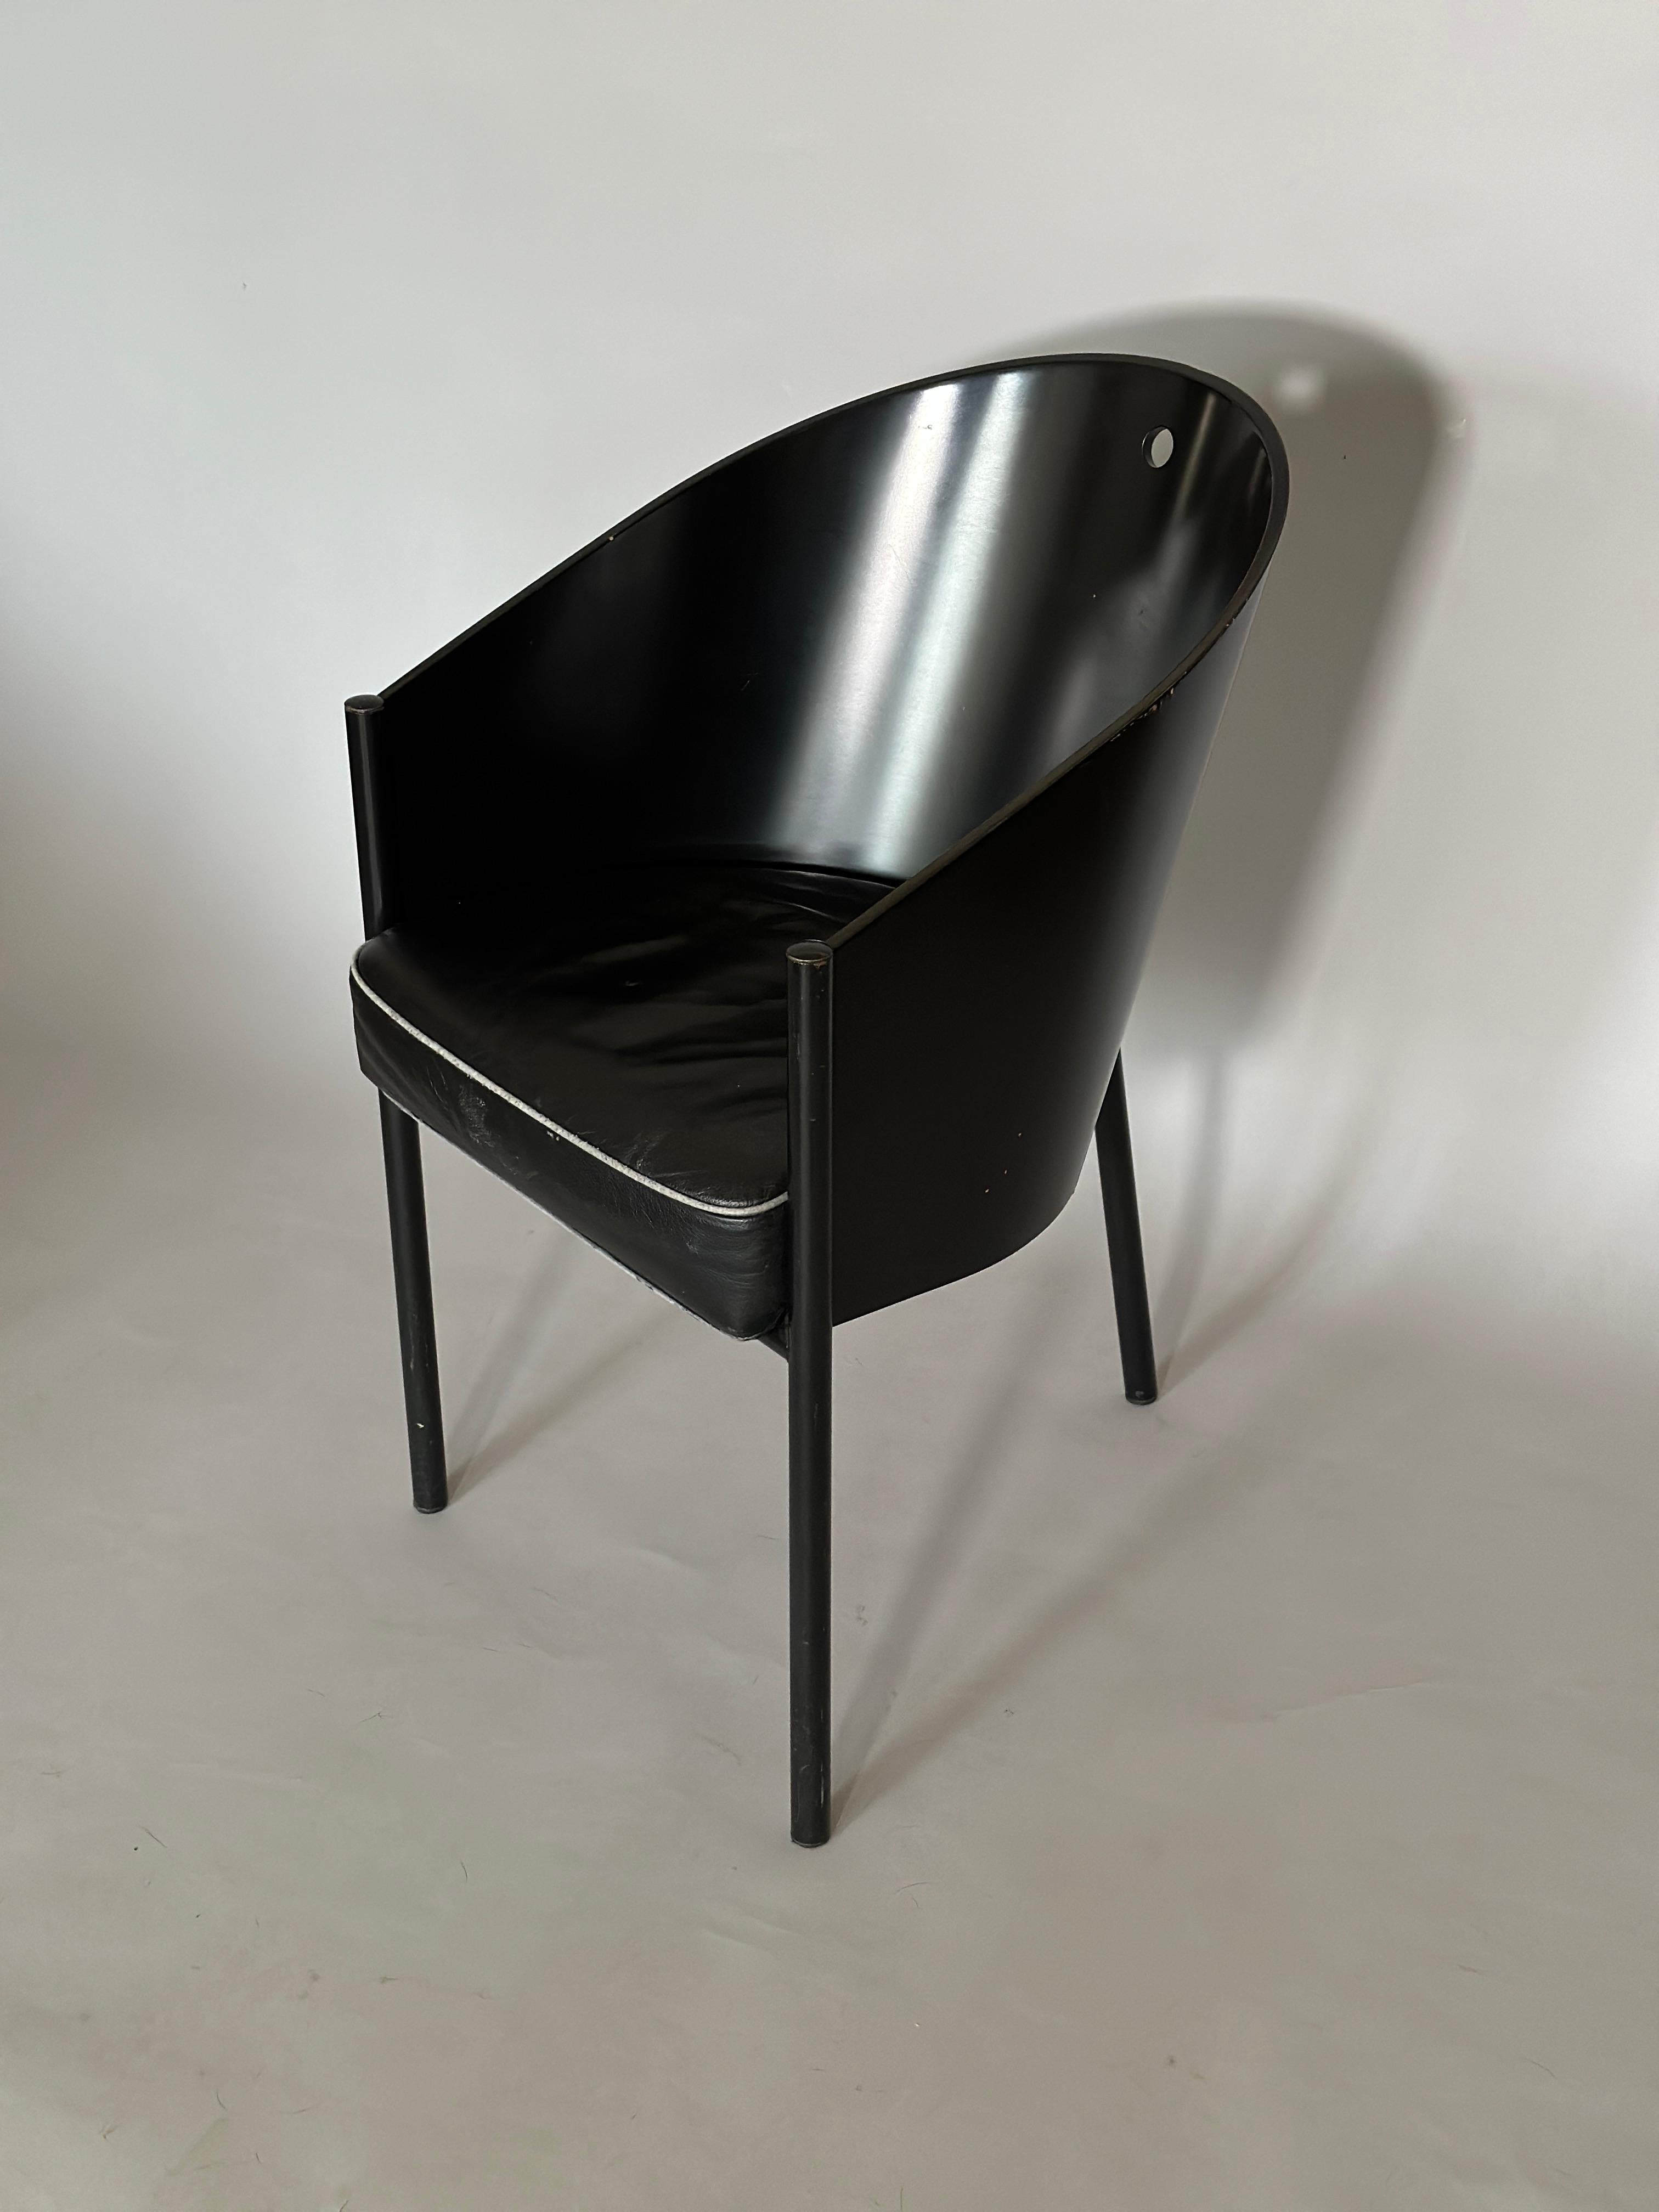 Vintage Costes Chair by Philippr Starck for Aleph 1980s In Good Condition For Sale In Čelinac, BA